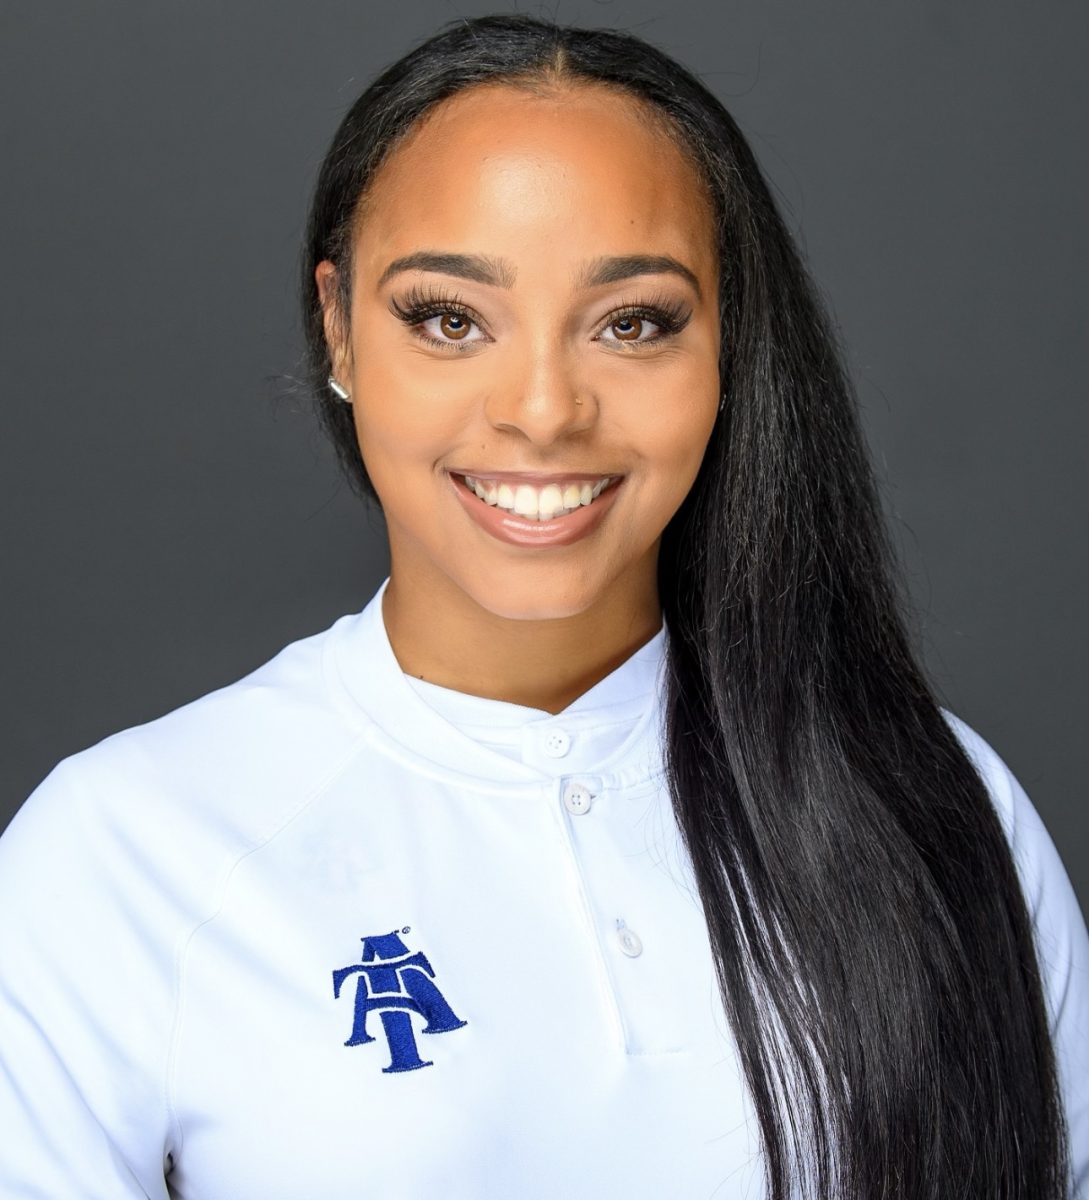 Jordyn Foster is the first woman to become the Director of Football Operations at N.C. A&T